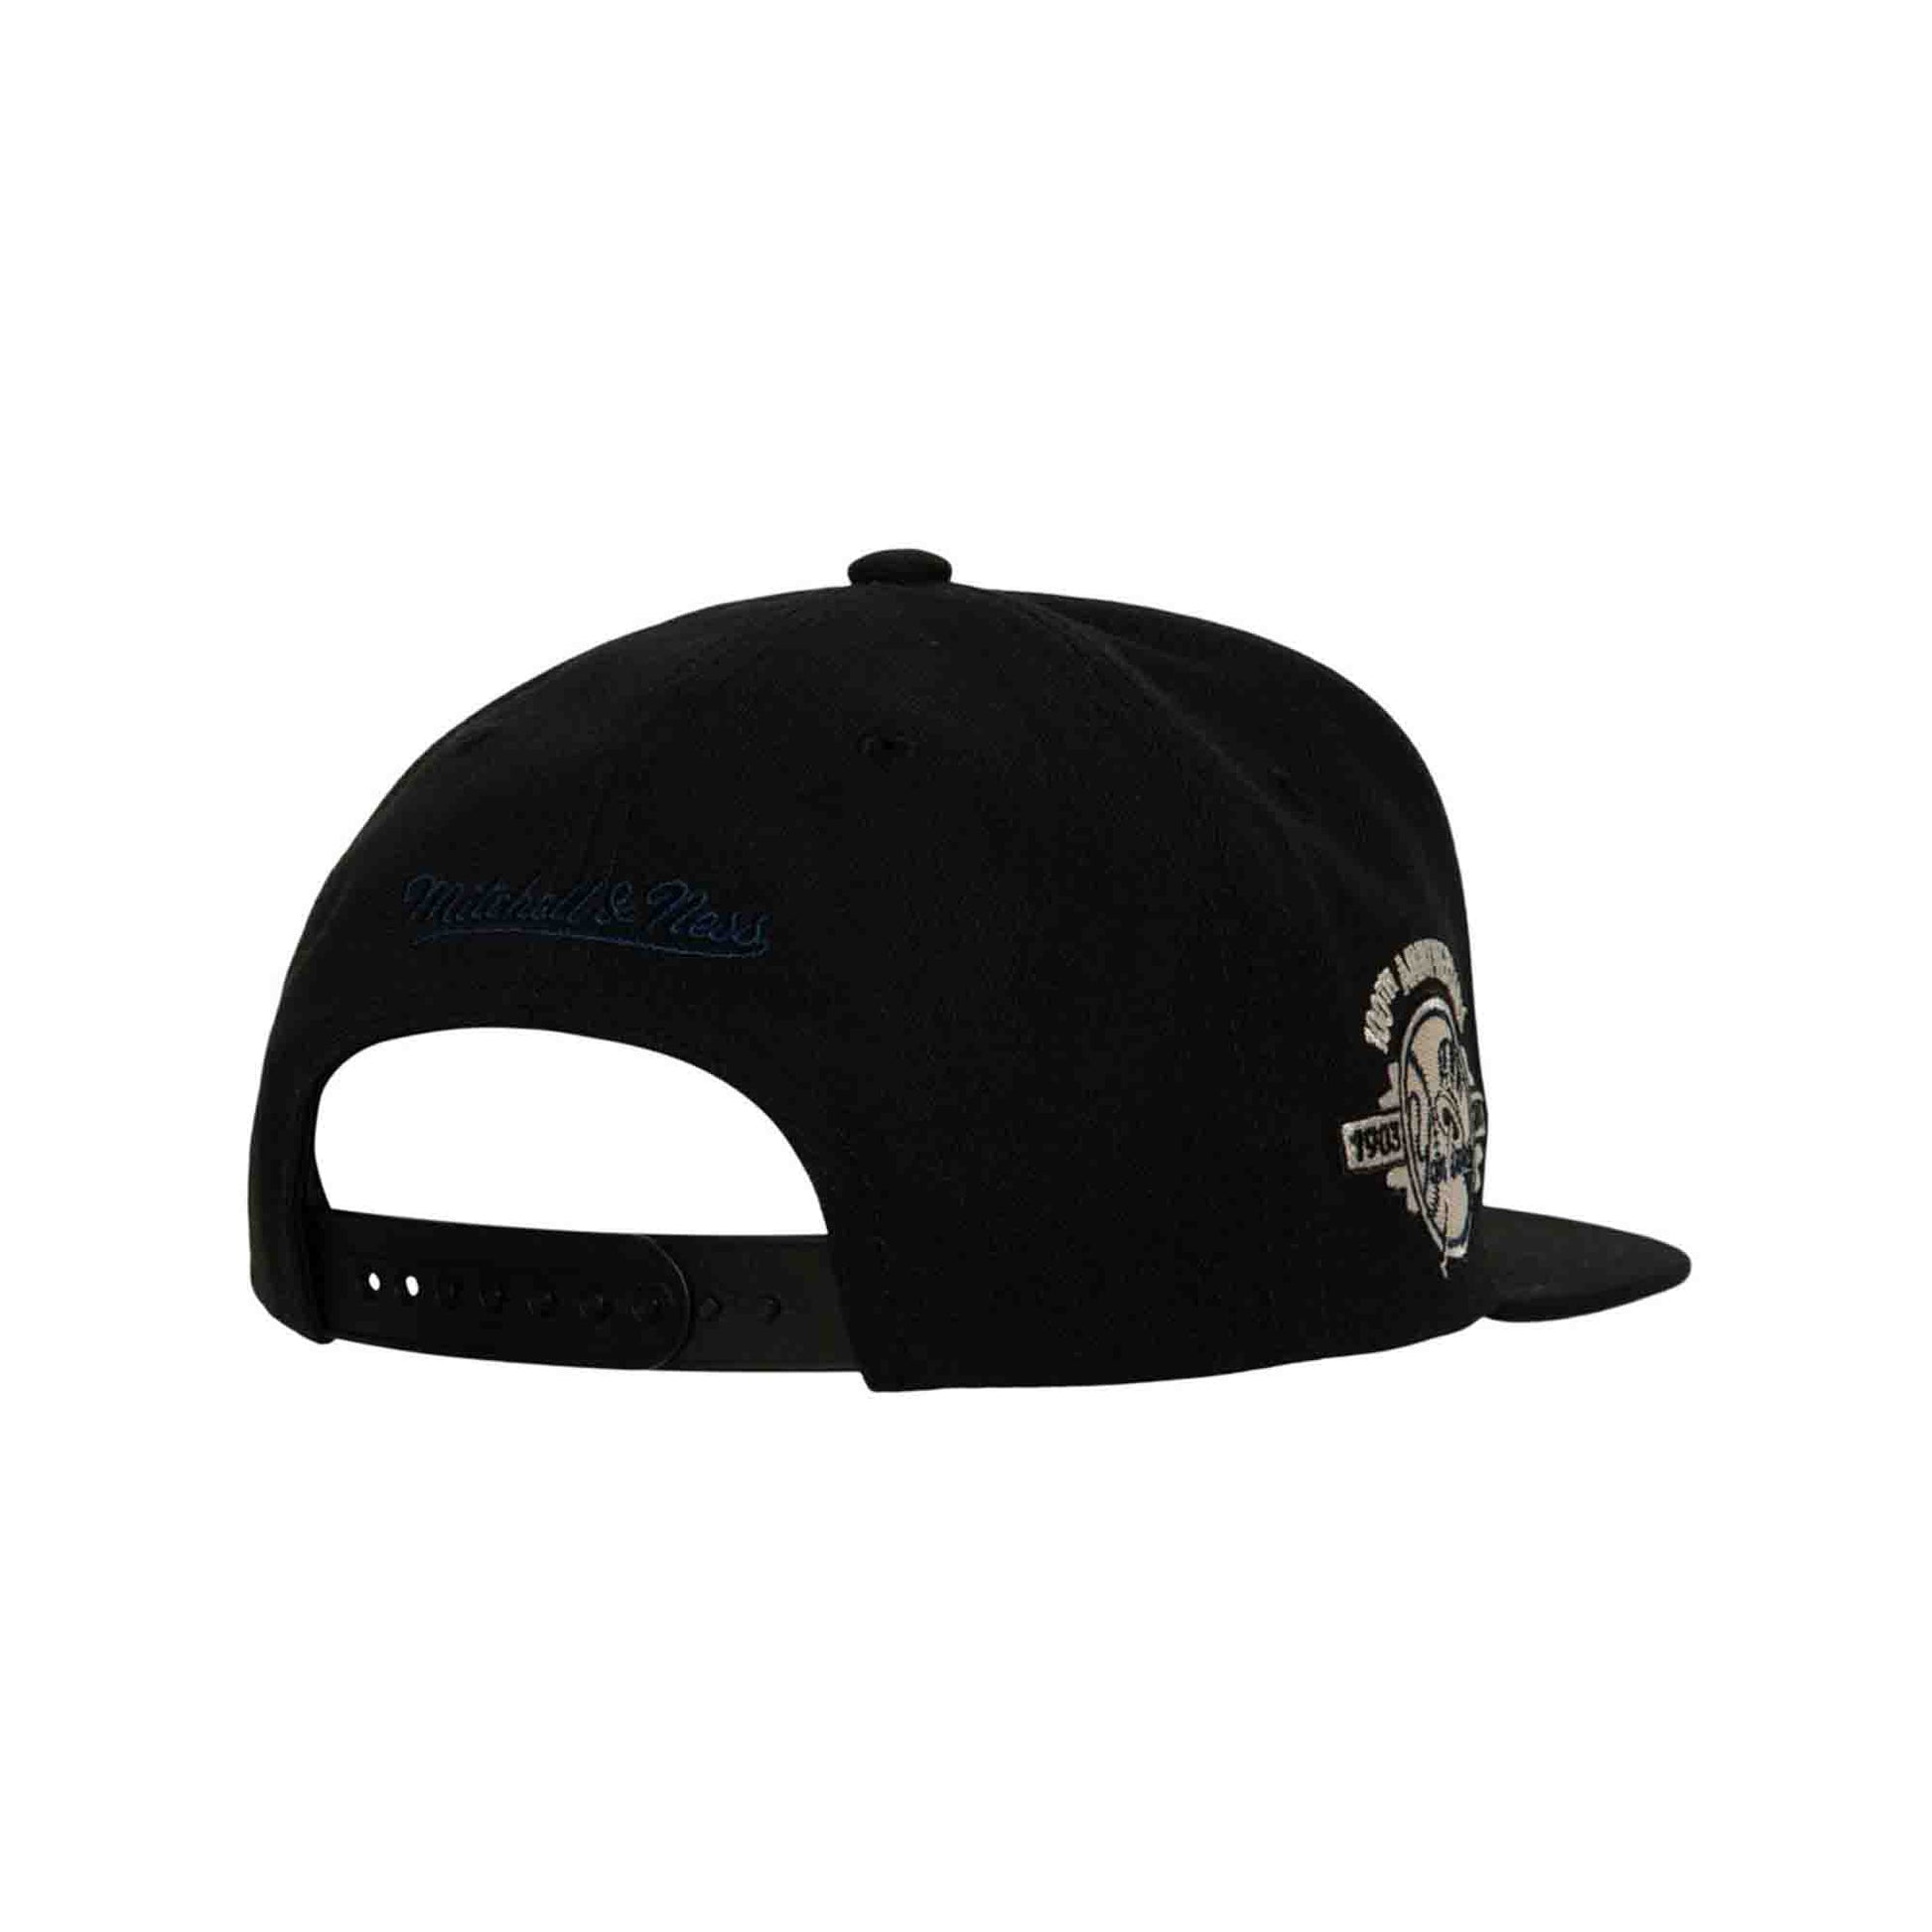 mitchell and ness yankees snapback